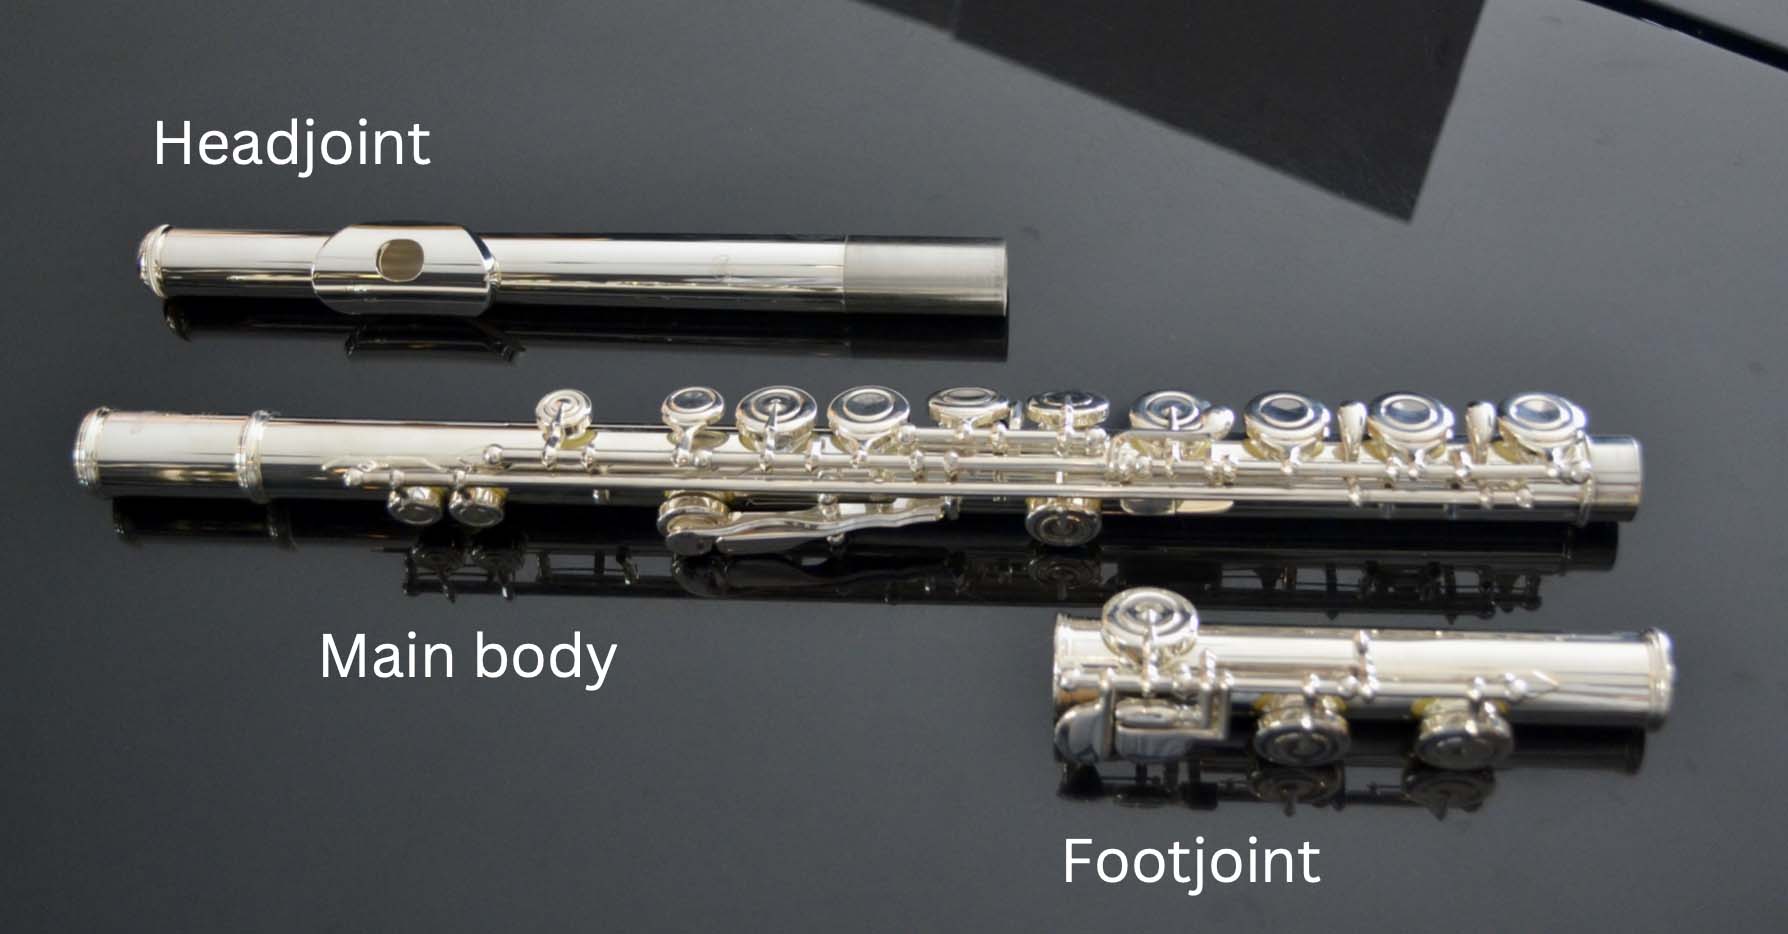 Diagram of flute. Headjoint at the top, main body in the middle, foot joint at the bottom.